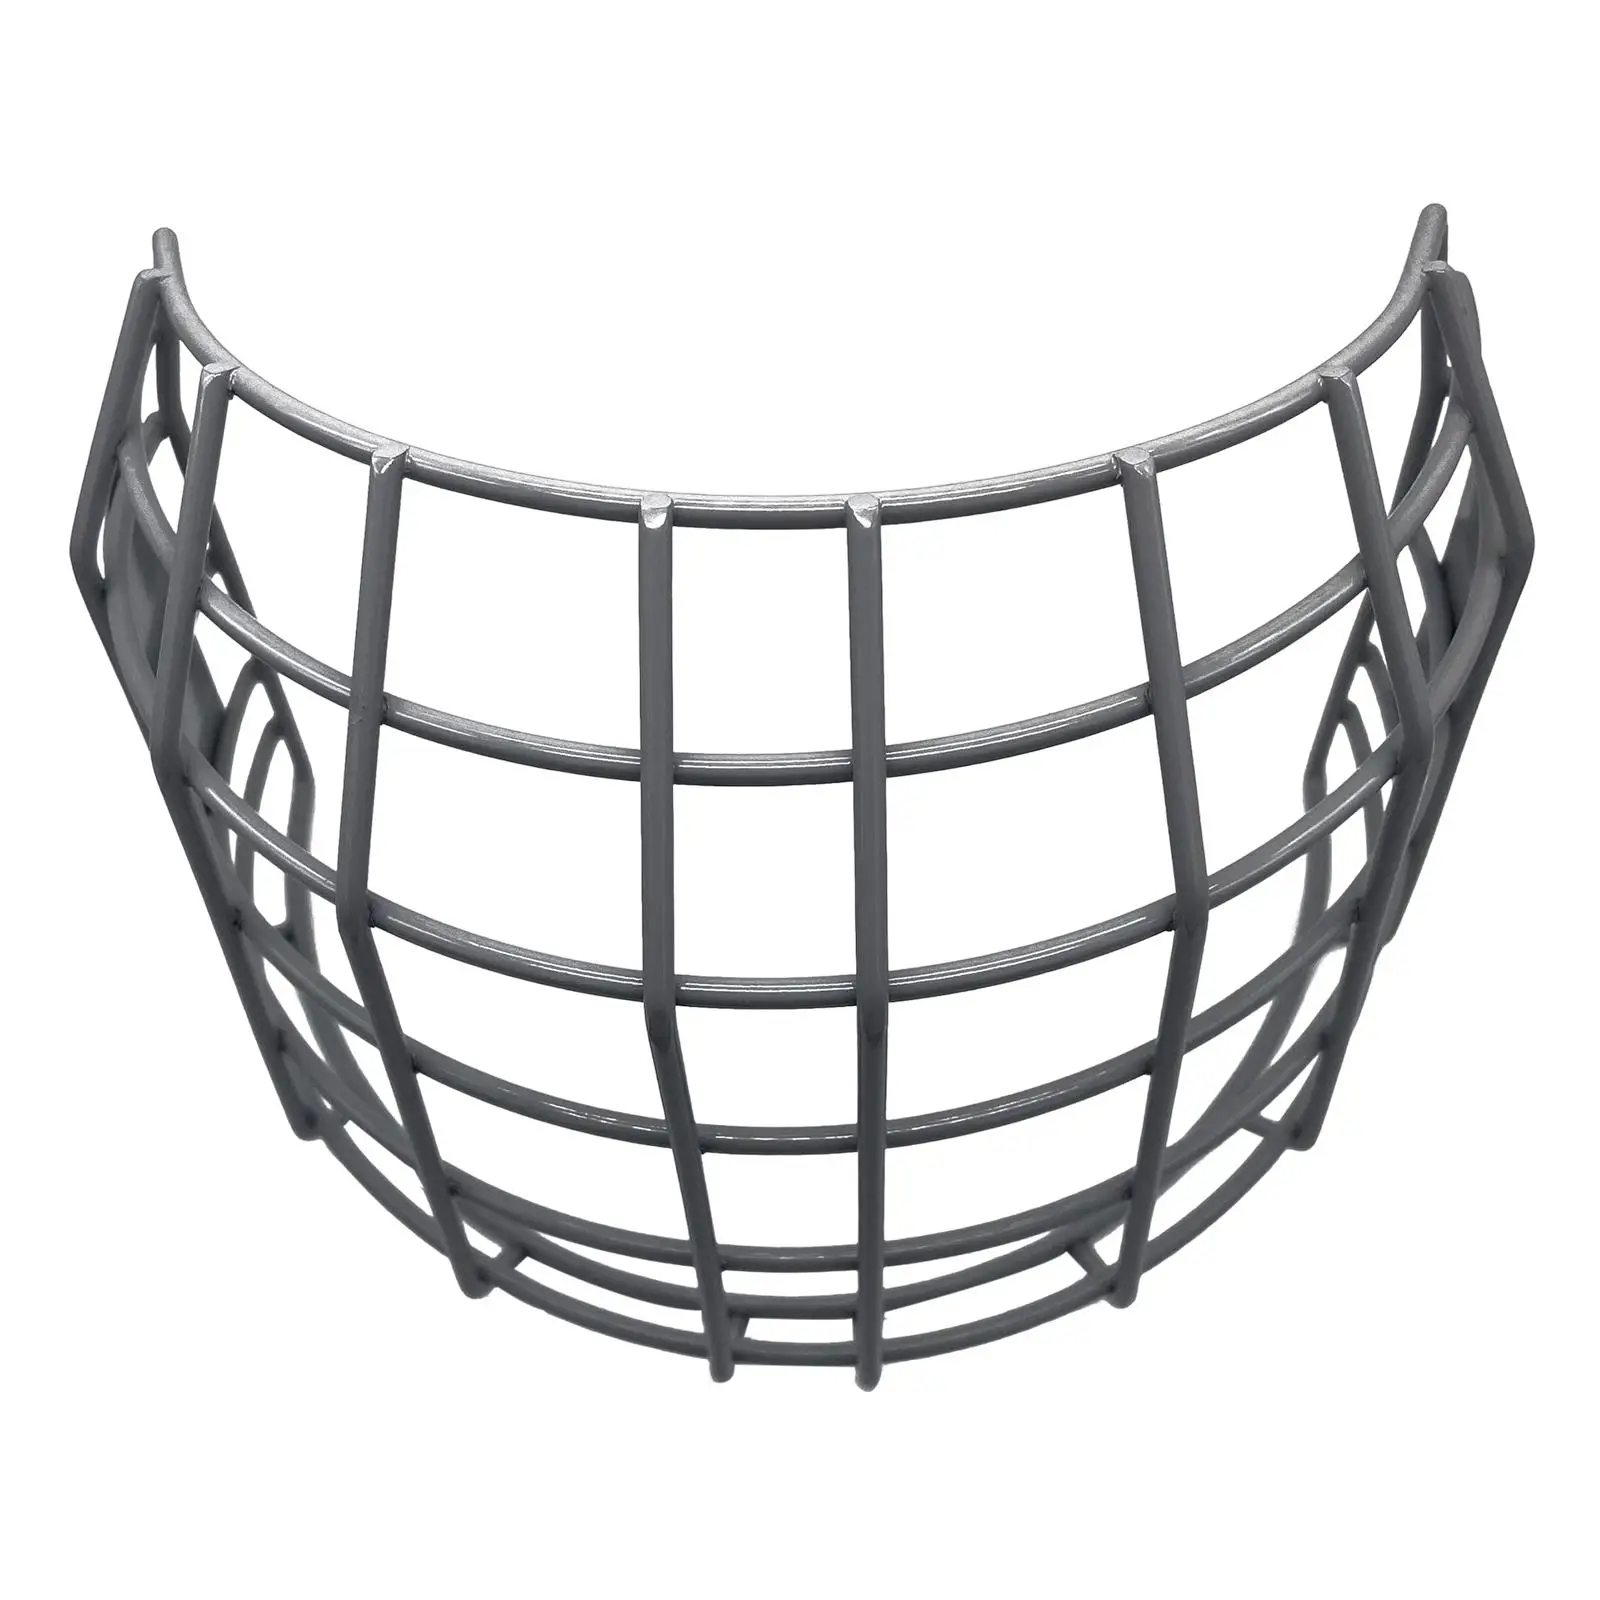 Batting Helmet Safety Mask Iron Wire Face Protective Wide Vision Baseball Face Guard for Softball Teeball Women Men